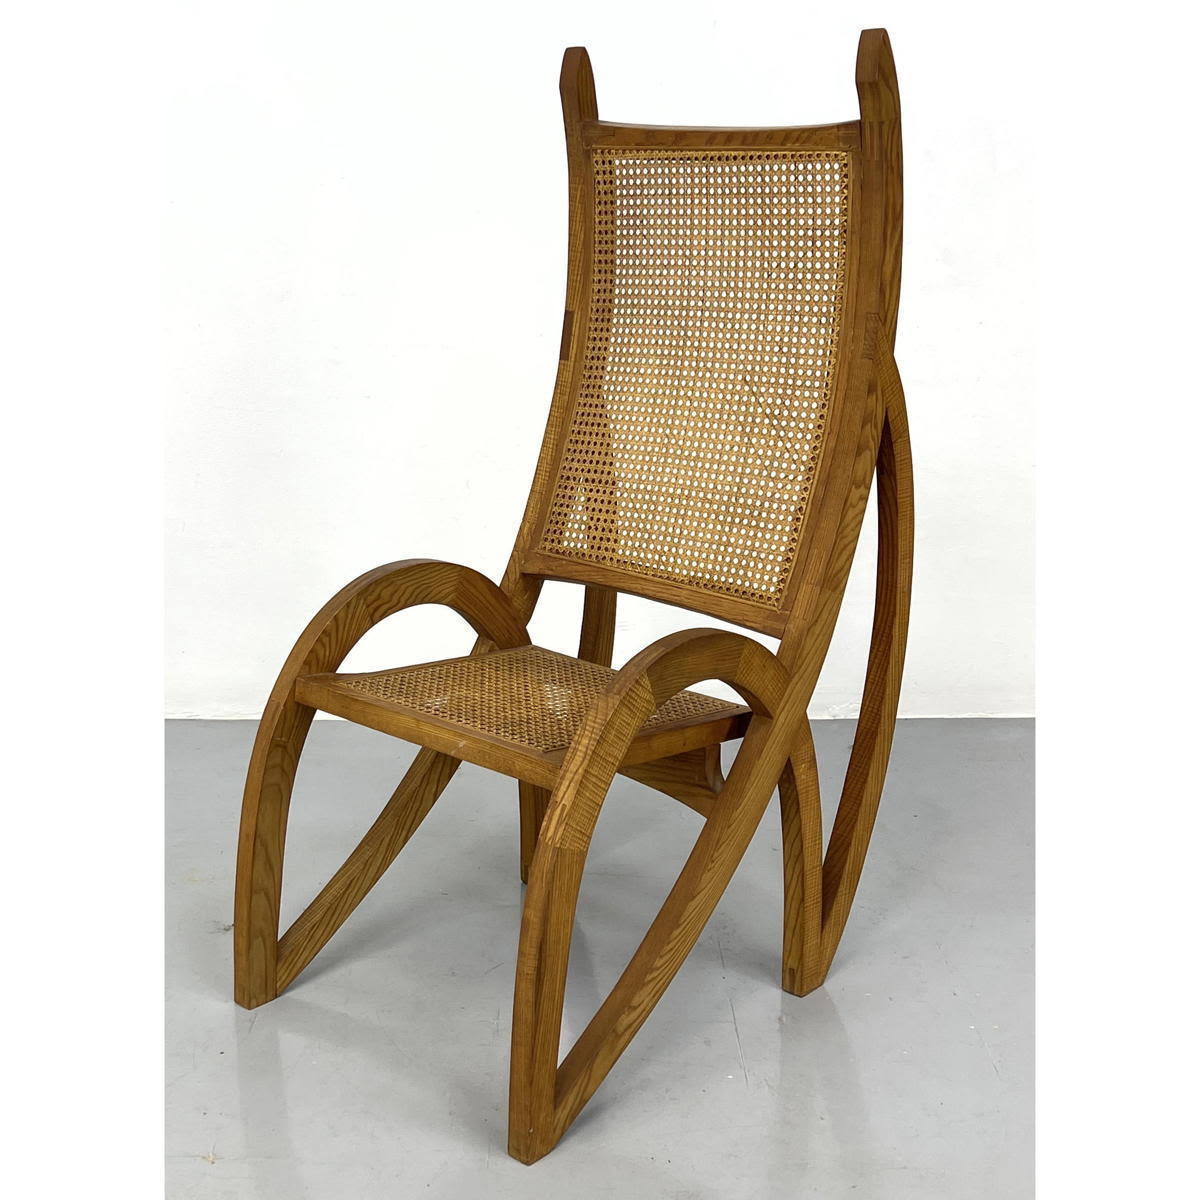 Unusual form Lounge Chair with 2b803d